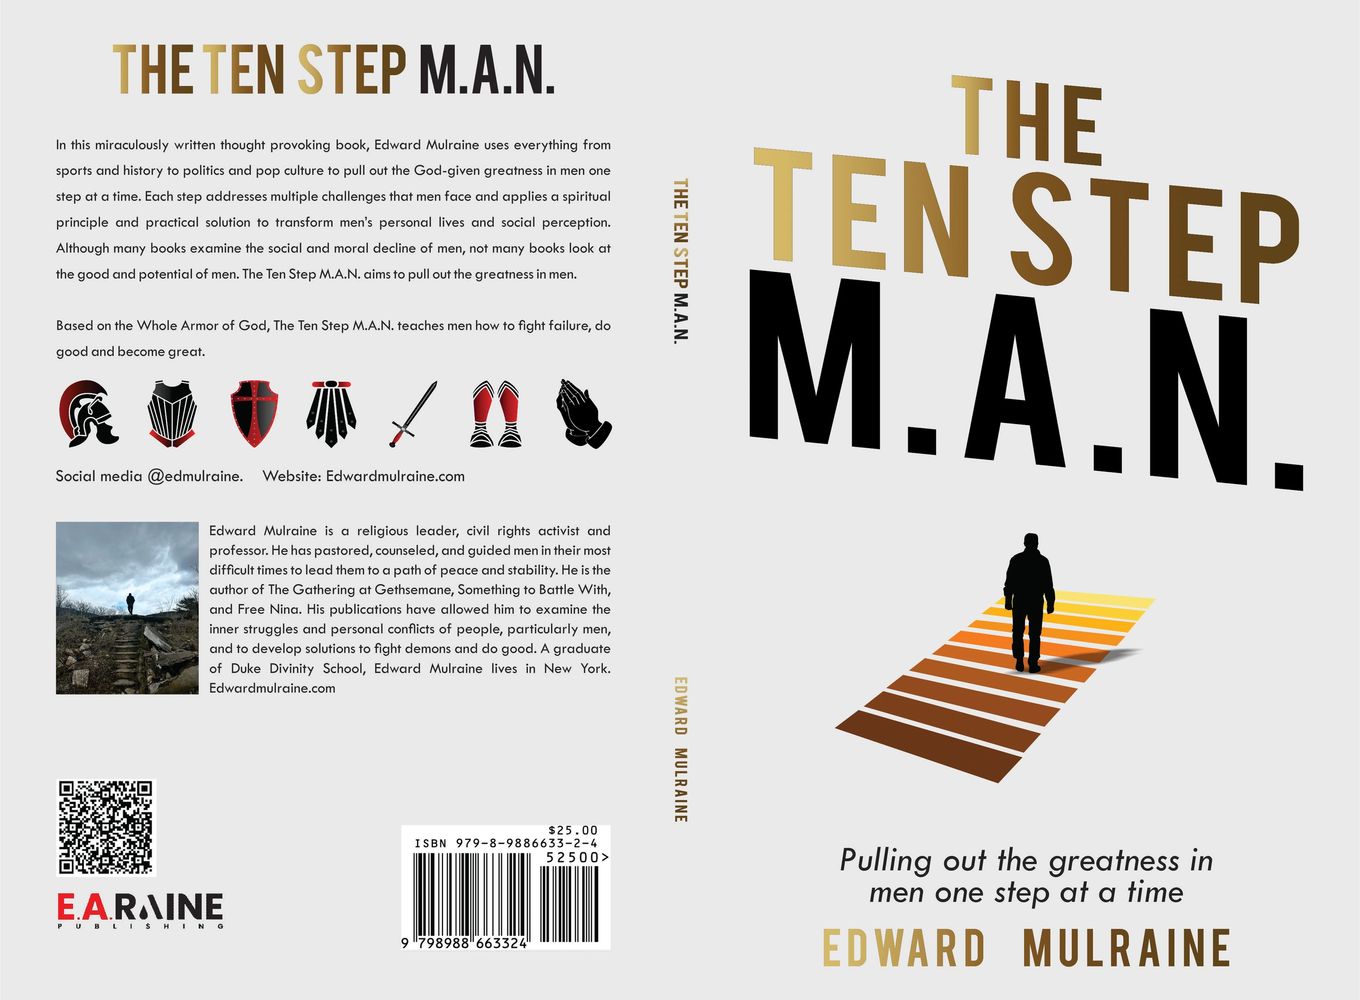 The revised edition of The Ten Step M.A.N. clarifies statements and elaborates on topics.